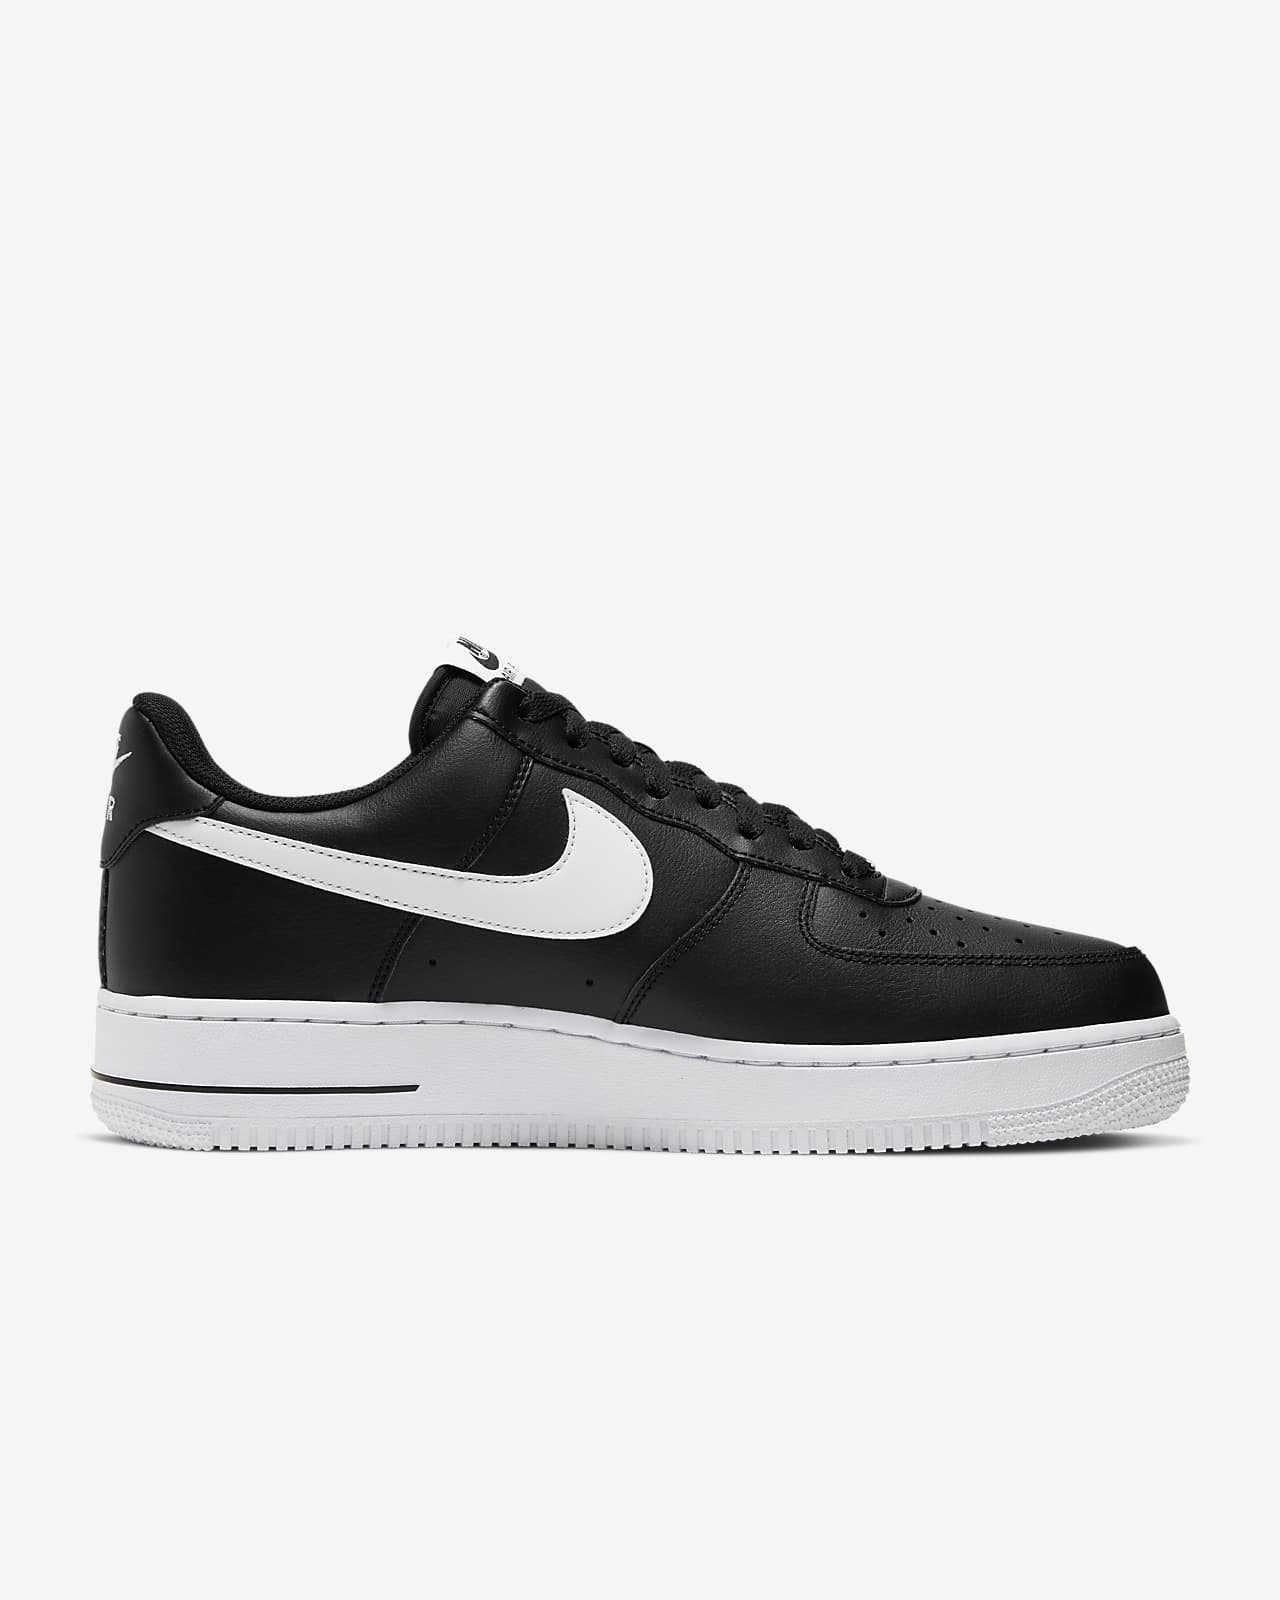 nike air force 1 07 junior black and white